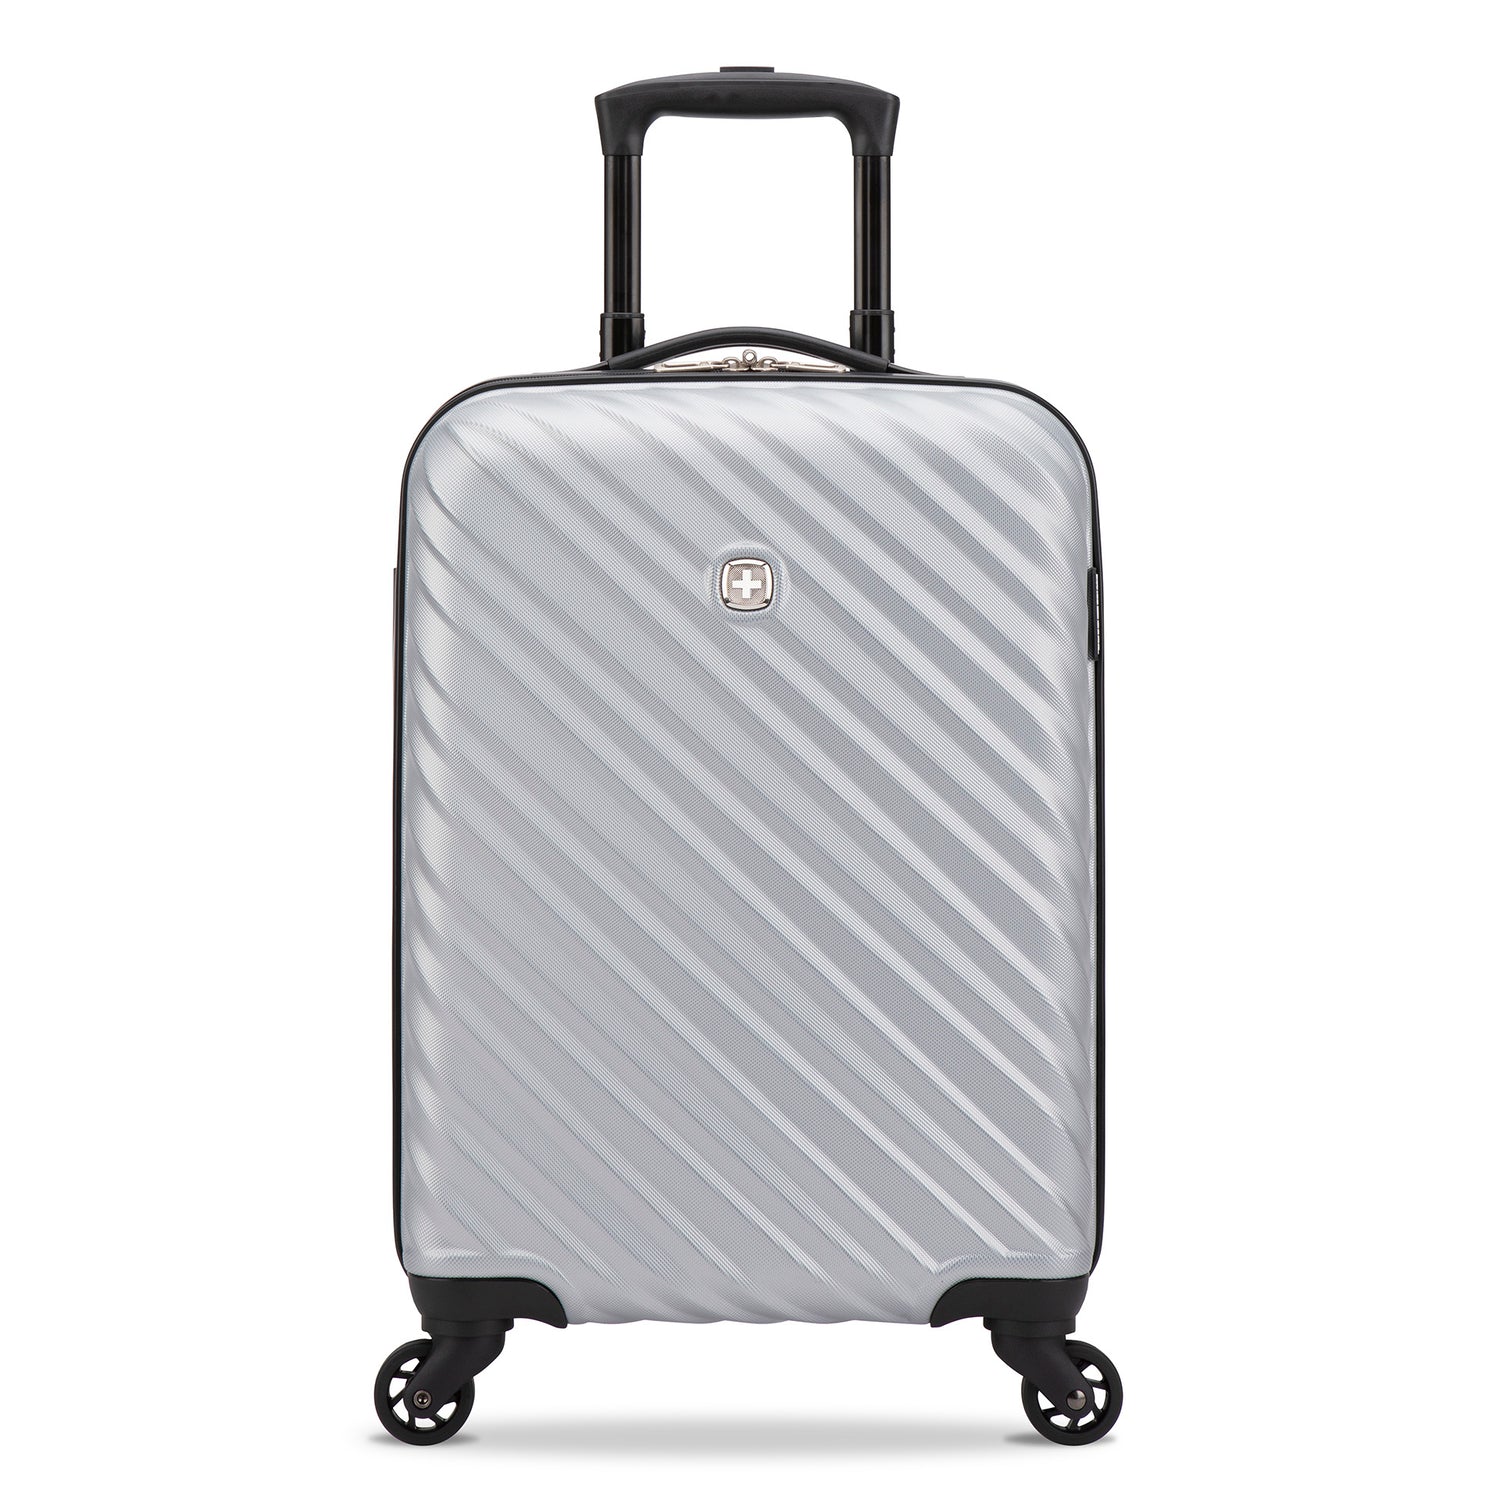 Front side view of a silver hard side luggage called MOD designed by Swiss Gear sold at Bentley, showcasing its telescopic handle and resistant-absorbant texture.